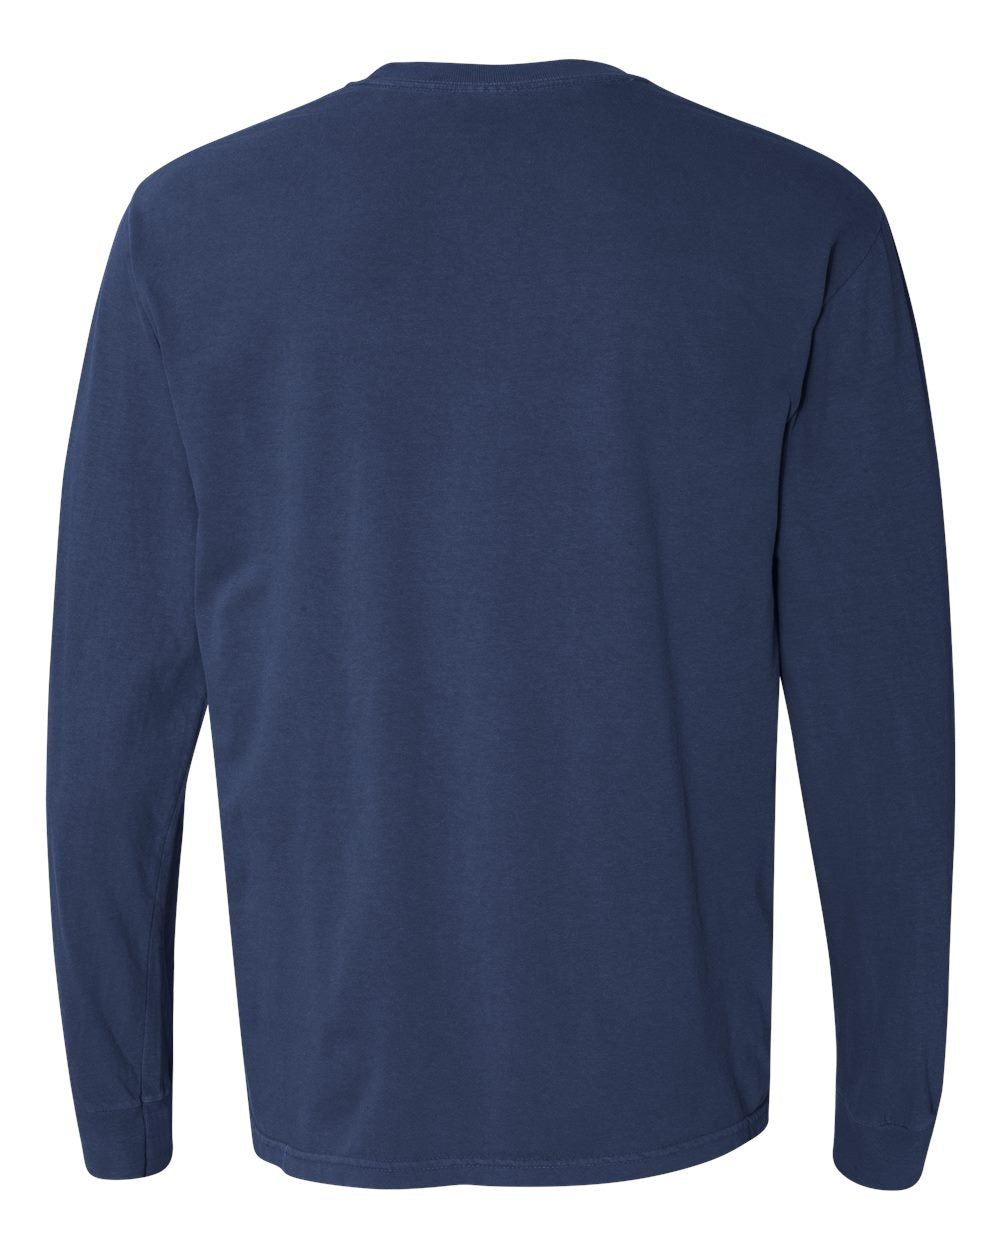 Comfort Colors Garment-Dyed Heavyweight Long Sleeve T-Shirt 6014 #color_True Navy